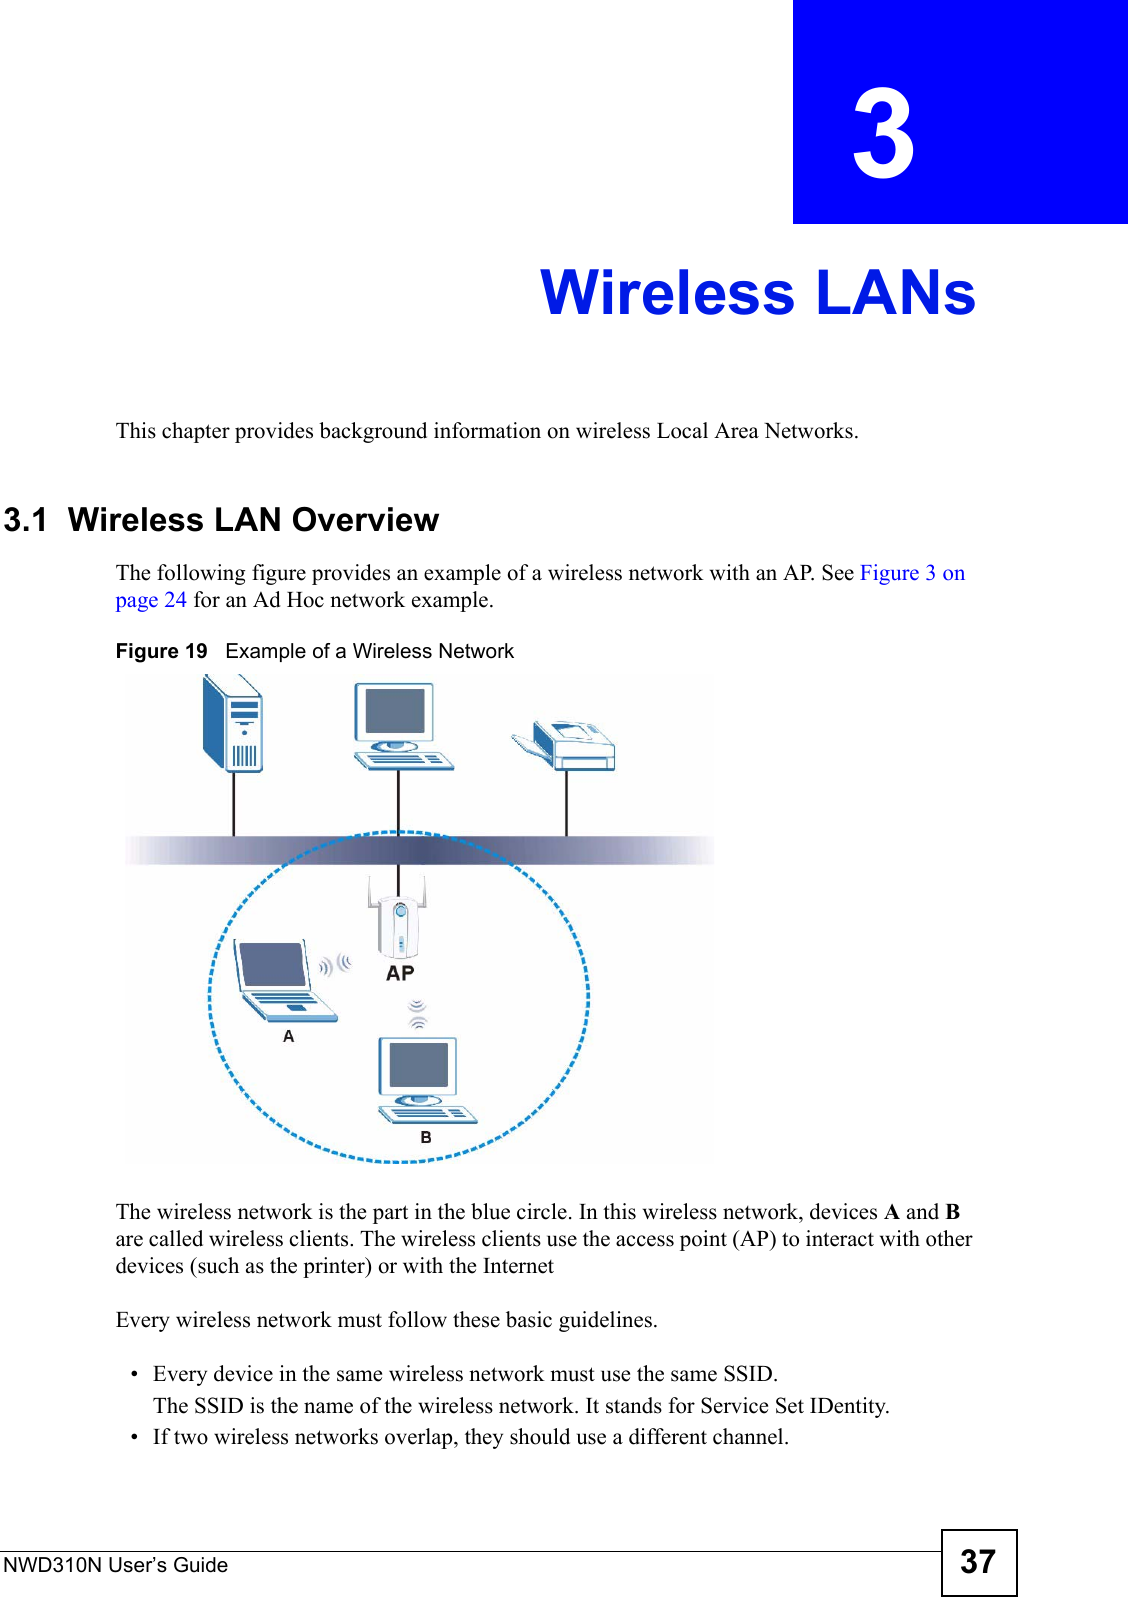 NWD310N User’s Guide 37CHAPTER  3 Wireless LANsThis chapter provides background information on wireless Local Area Networks.3.1  Wireless LAN Overview The following figure provides an example of a wireless network with an AP. See Figure 3 on page 24 for an Ad Hoc network example.Figure 19   Example of a Wireless NetworkThe wireless network is the part in the blue circle. In this wireless network, devices A and B are called wireless clients. The wireless clients use the access point (AP) to interact with other devices (such as the printer) or with the InternetEvery wireless network must follow these basic guidelines.• Every device in the same wireless network must use the same SSID.The SSID is the name of the wireless network. It stands for Service Set IDentity.• If two wireless networks overlap, they should use a different channel.